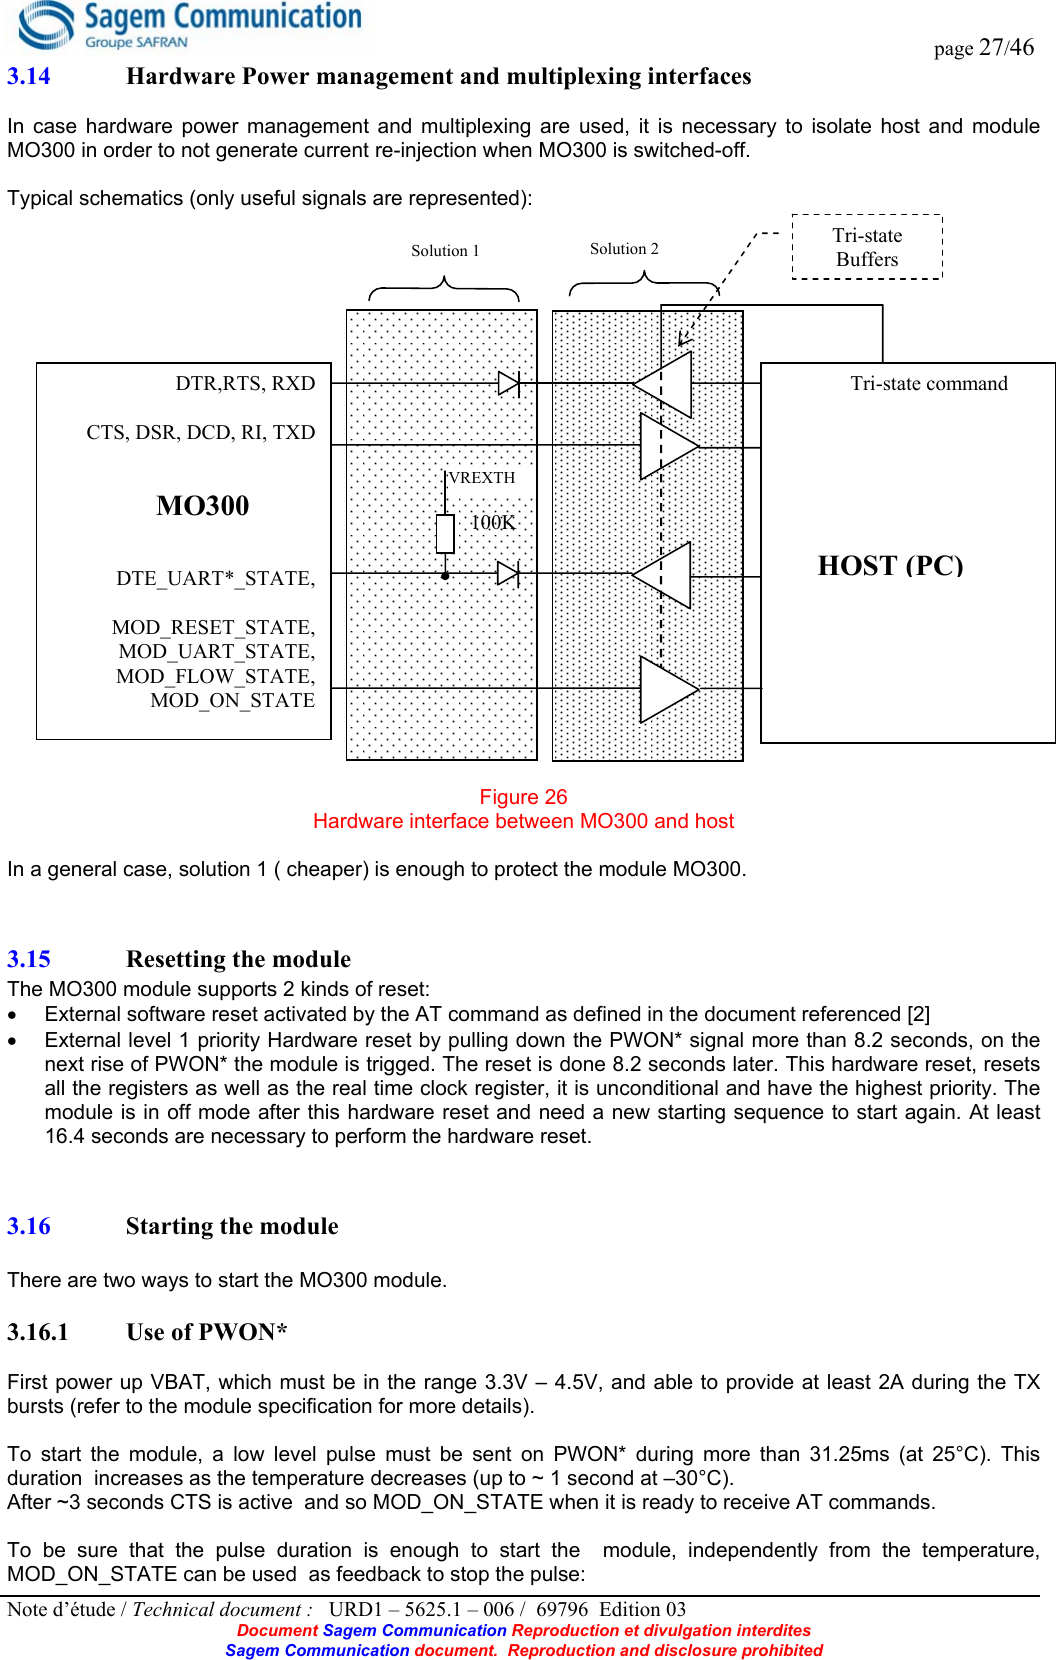  page 27/46 Note d’étude / Technical document :   URD1 – 5625.1 – 006 /  69796  Edition 03 Document Sagem Communication Reproduction et divulgation interdites Sagem Communication document.  Reproduction and disclosure prohibited 3.14 Hardware Power management and multiplexing interfaces  In case hardware power management and multiplexing are used, it is necessary to isolate host and module MO300 in order to not generate current re-injection when MO300 is switched-off.  Typical schematics (only useful signals are represented):  Figure 26 Hardware interface between MO300 and host  In a general case, solution 1 ( cheaper) is enough to protect the module MO300. 3.15 Resetting the module The MO300 module supports 2 kinds of reset: •  External software reset activated by the AT command as defined in the document referenced [2] •  External level 1 priority Hardware reset by pulling down the PWON* signal more than 8.2 seconds, on the next rise of PWON* the module is trigged. The reset is done 8.2 seconds later. This hardware reset, resets all the registers as well as the real time clock register, it is unconditional and have the highest priority. The module is in off mode after this hardware reset and need a new starting sequence to start again. At least 16.4 seconds are necessary to perform the hardware reset. 3.16 Starting the module   There are two ways to start the MO300 module.  3.16.1 Use of PWON*  First power up VBAT, which must be in the range 3.3V – 4.5V, and able to provide at least 2A during the TX bursts (refer to the module specification for more details).  To start the module, a low level pulse must be sent on PWON* during more than 31.25ms (at 25°C). This duration  increases as the temperature decreases (up to ~ 1 second at –30°C). After ~3 seconds CTS is active  and so MOD_ON_STATE when it is ready to receive AT commands.  To be sure that the pulse duration is enough to start the  module, independently from the temperature,  MOD_ON_STATE can be used  as feedback to stop the pulse:                DTR,RTS, RXD                                                        CTS, DSR, DCD, RI, TXD      DTE_UART*_STATE,  MOD_RESET_STATE, MOD_UART_STATE, MOD_FLOW_STATE, MOD_ON_STATE               Tri-state command              MO300HOST (PC)VREXTH Tri-state Buffers 100K Solution 1 Solution 2